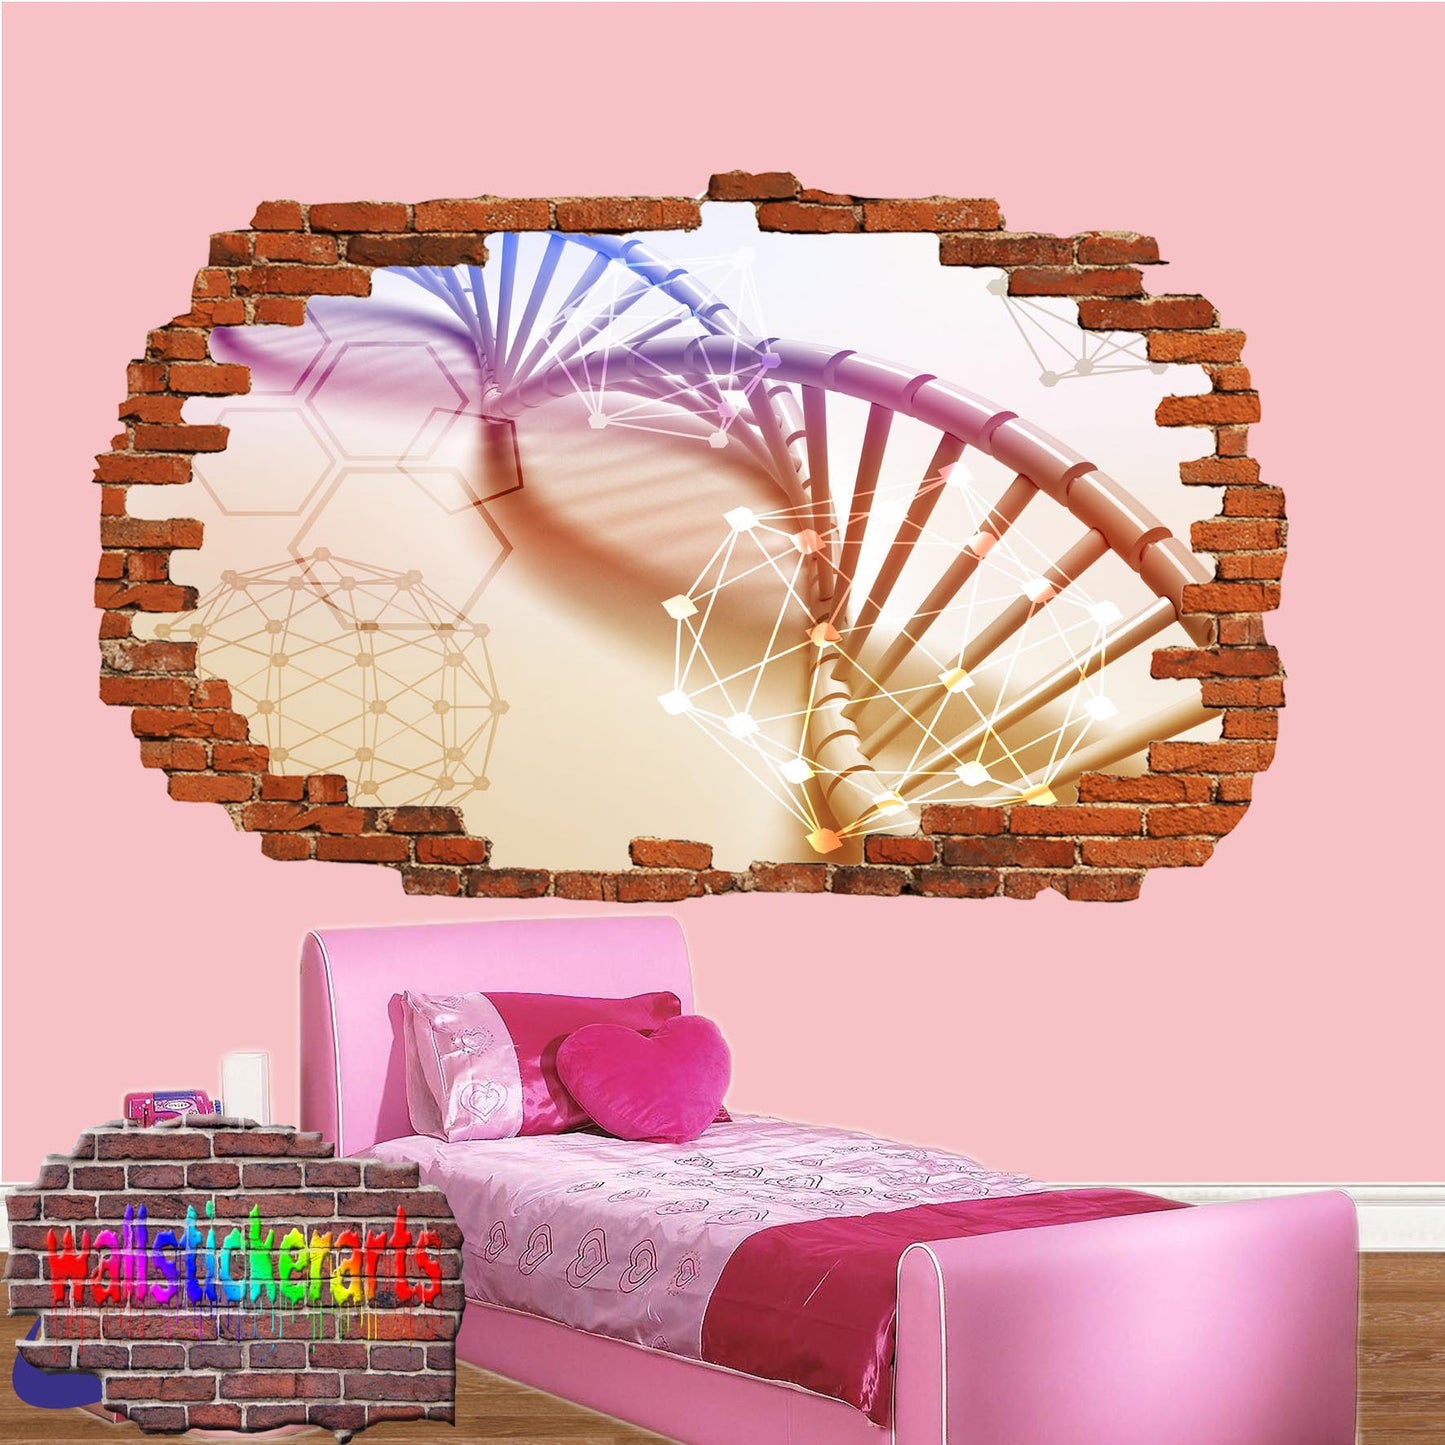 Biology Dna Structure Genetics Education 3d Art Smashed Effect Wall Sticker Room Office Nursery Shop Decoration Decal Mural XZ2